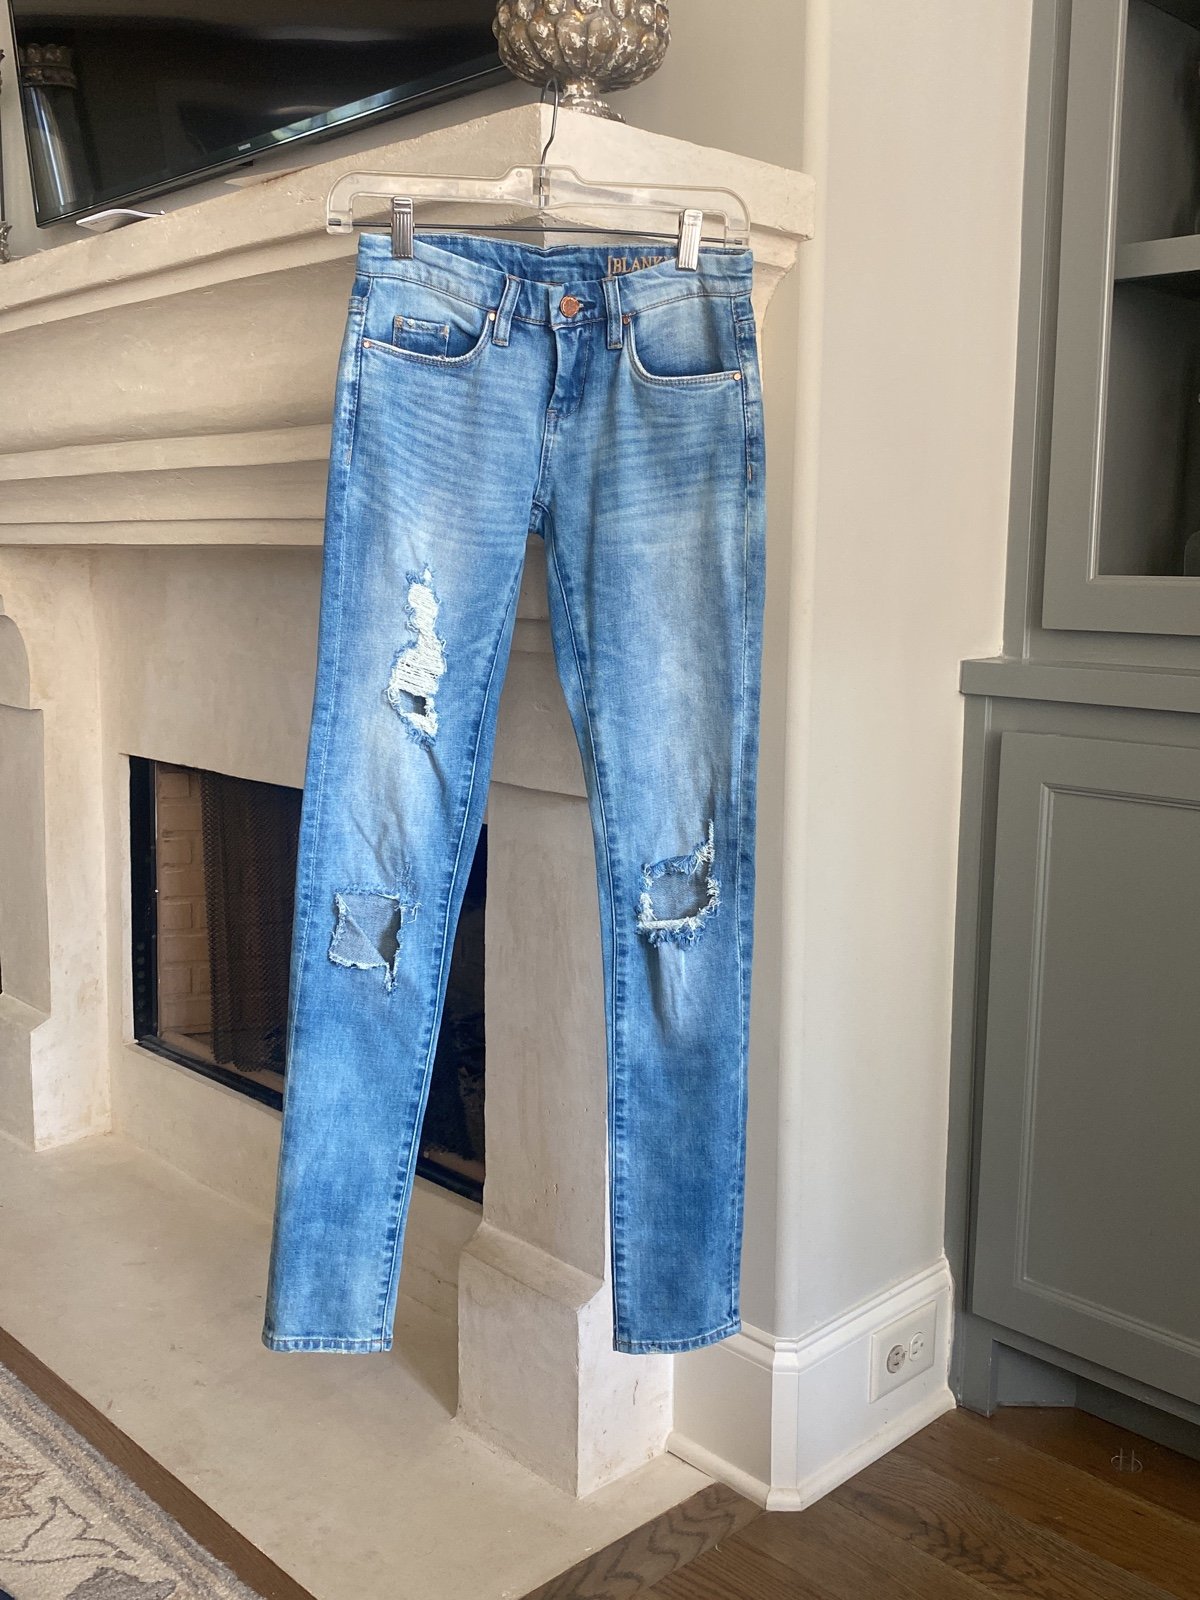 high discount Blanknyc Jeans Jv9Iy9A8s Buying Cheap